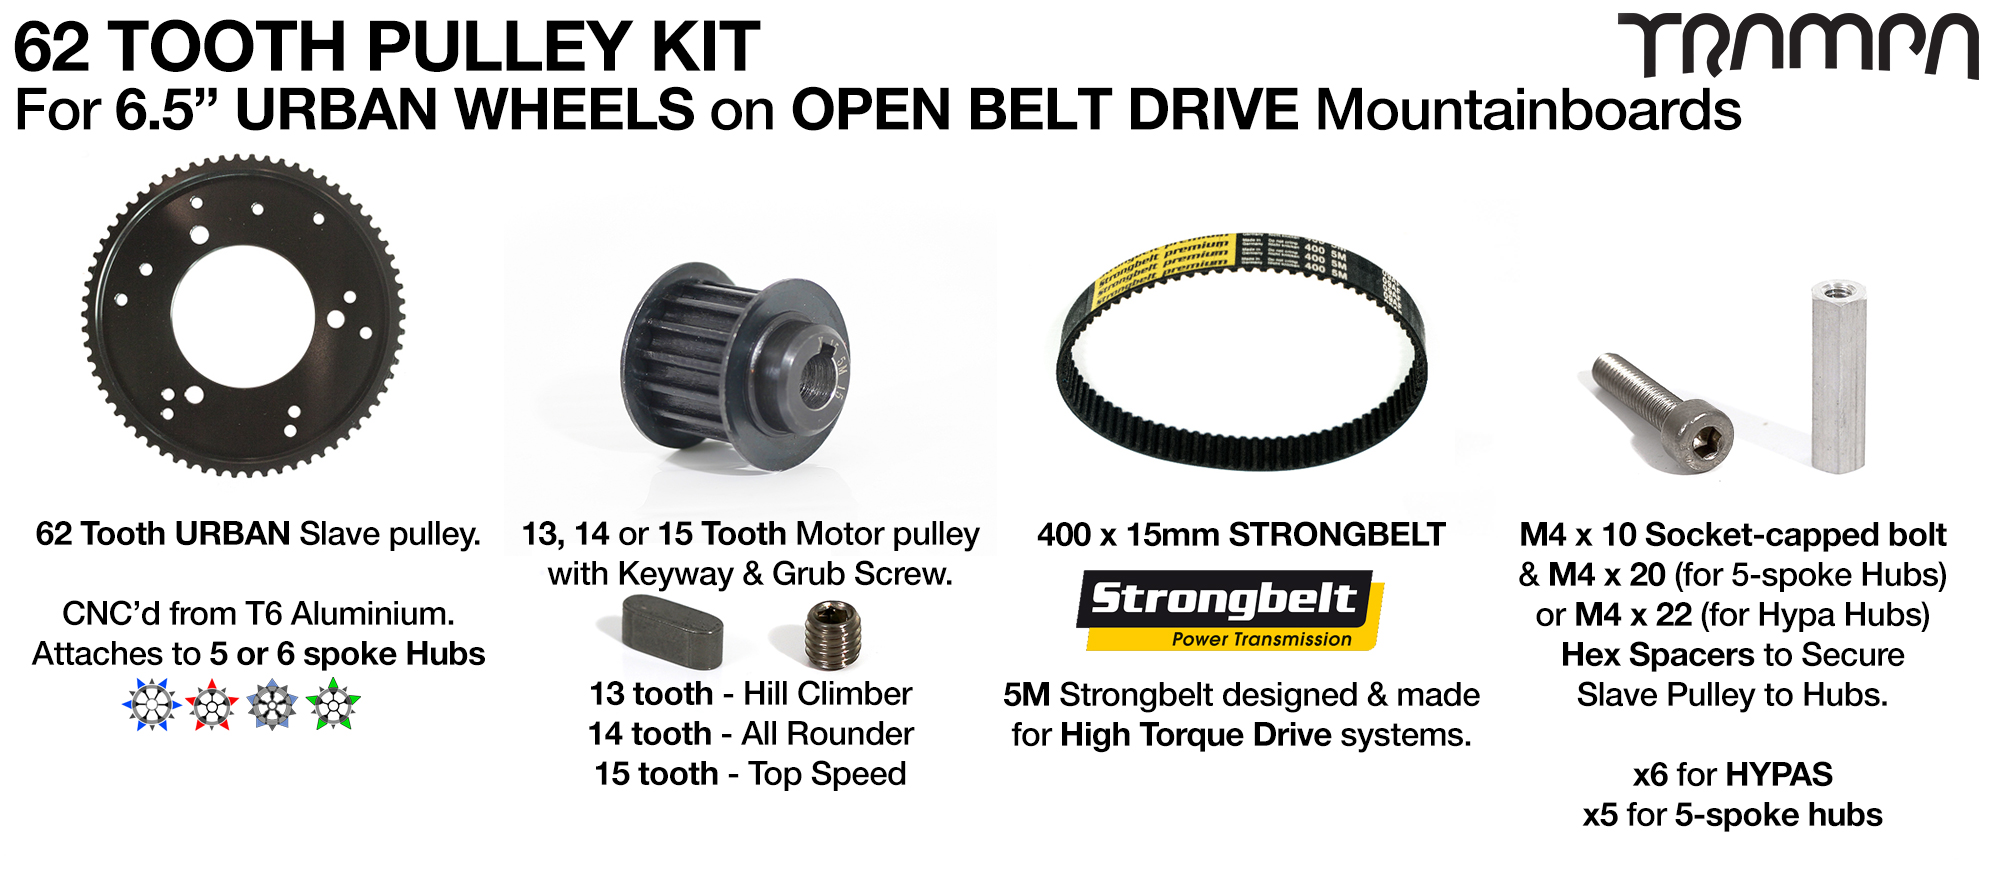 76T OBD Panel 62 Tooth Pulley Kit with 415x 15mm Belt - URBAN Wheels